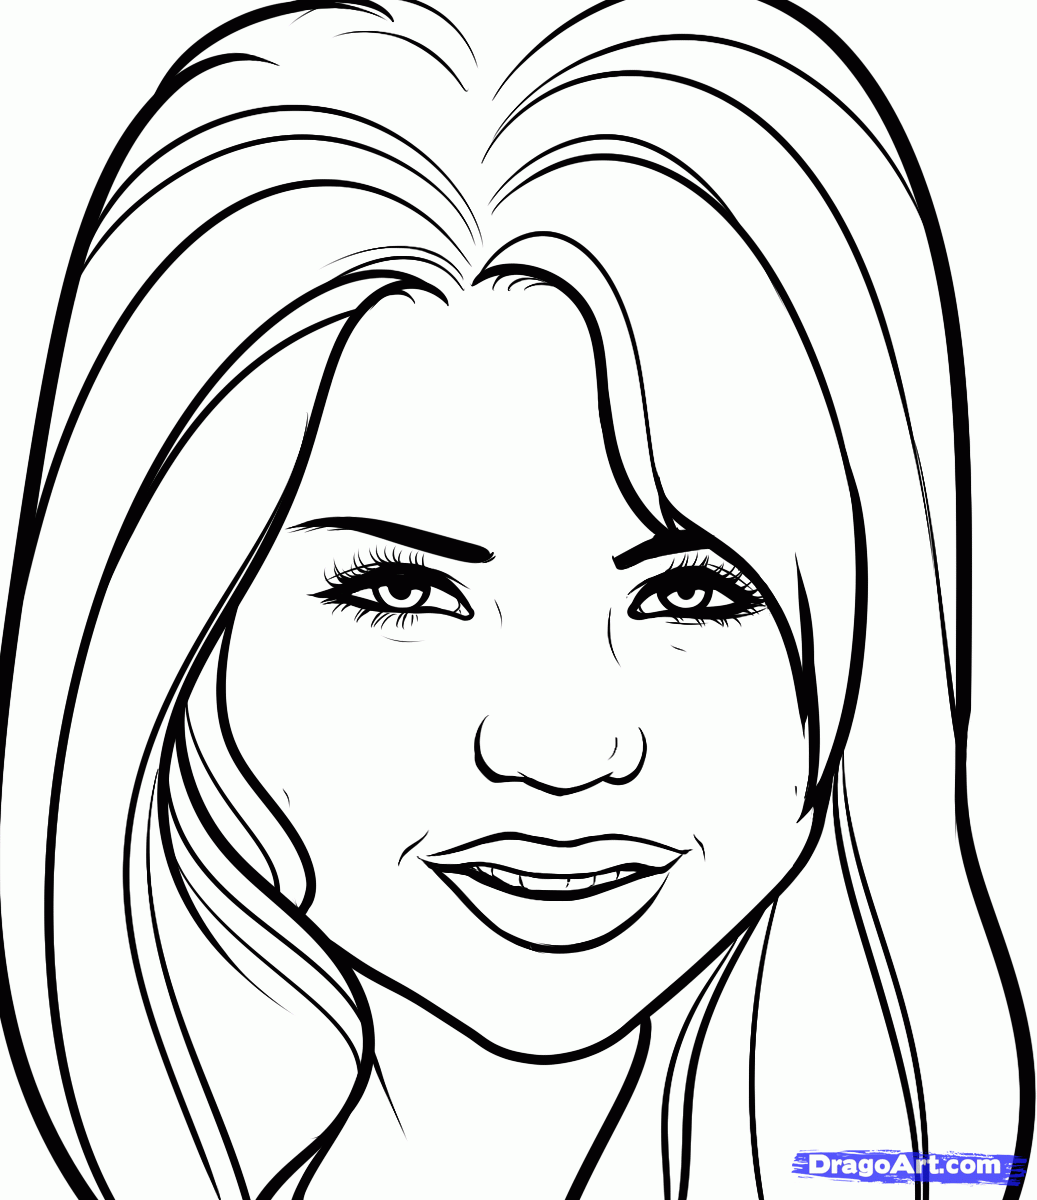 Wizards Of Waverly Place Coloring Pages To Print : The Wizard Of Oz